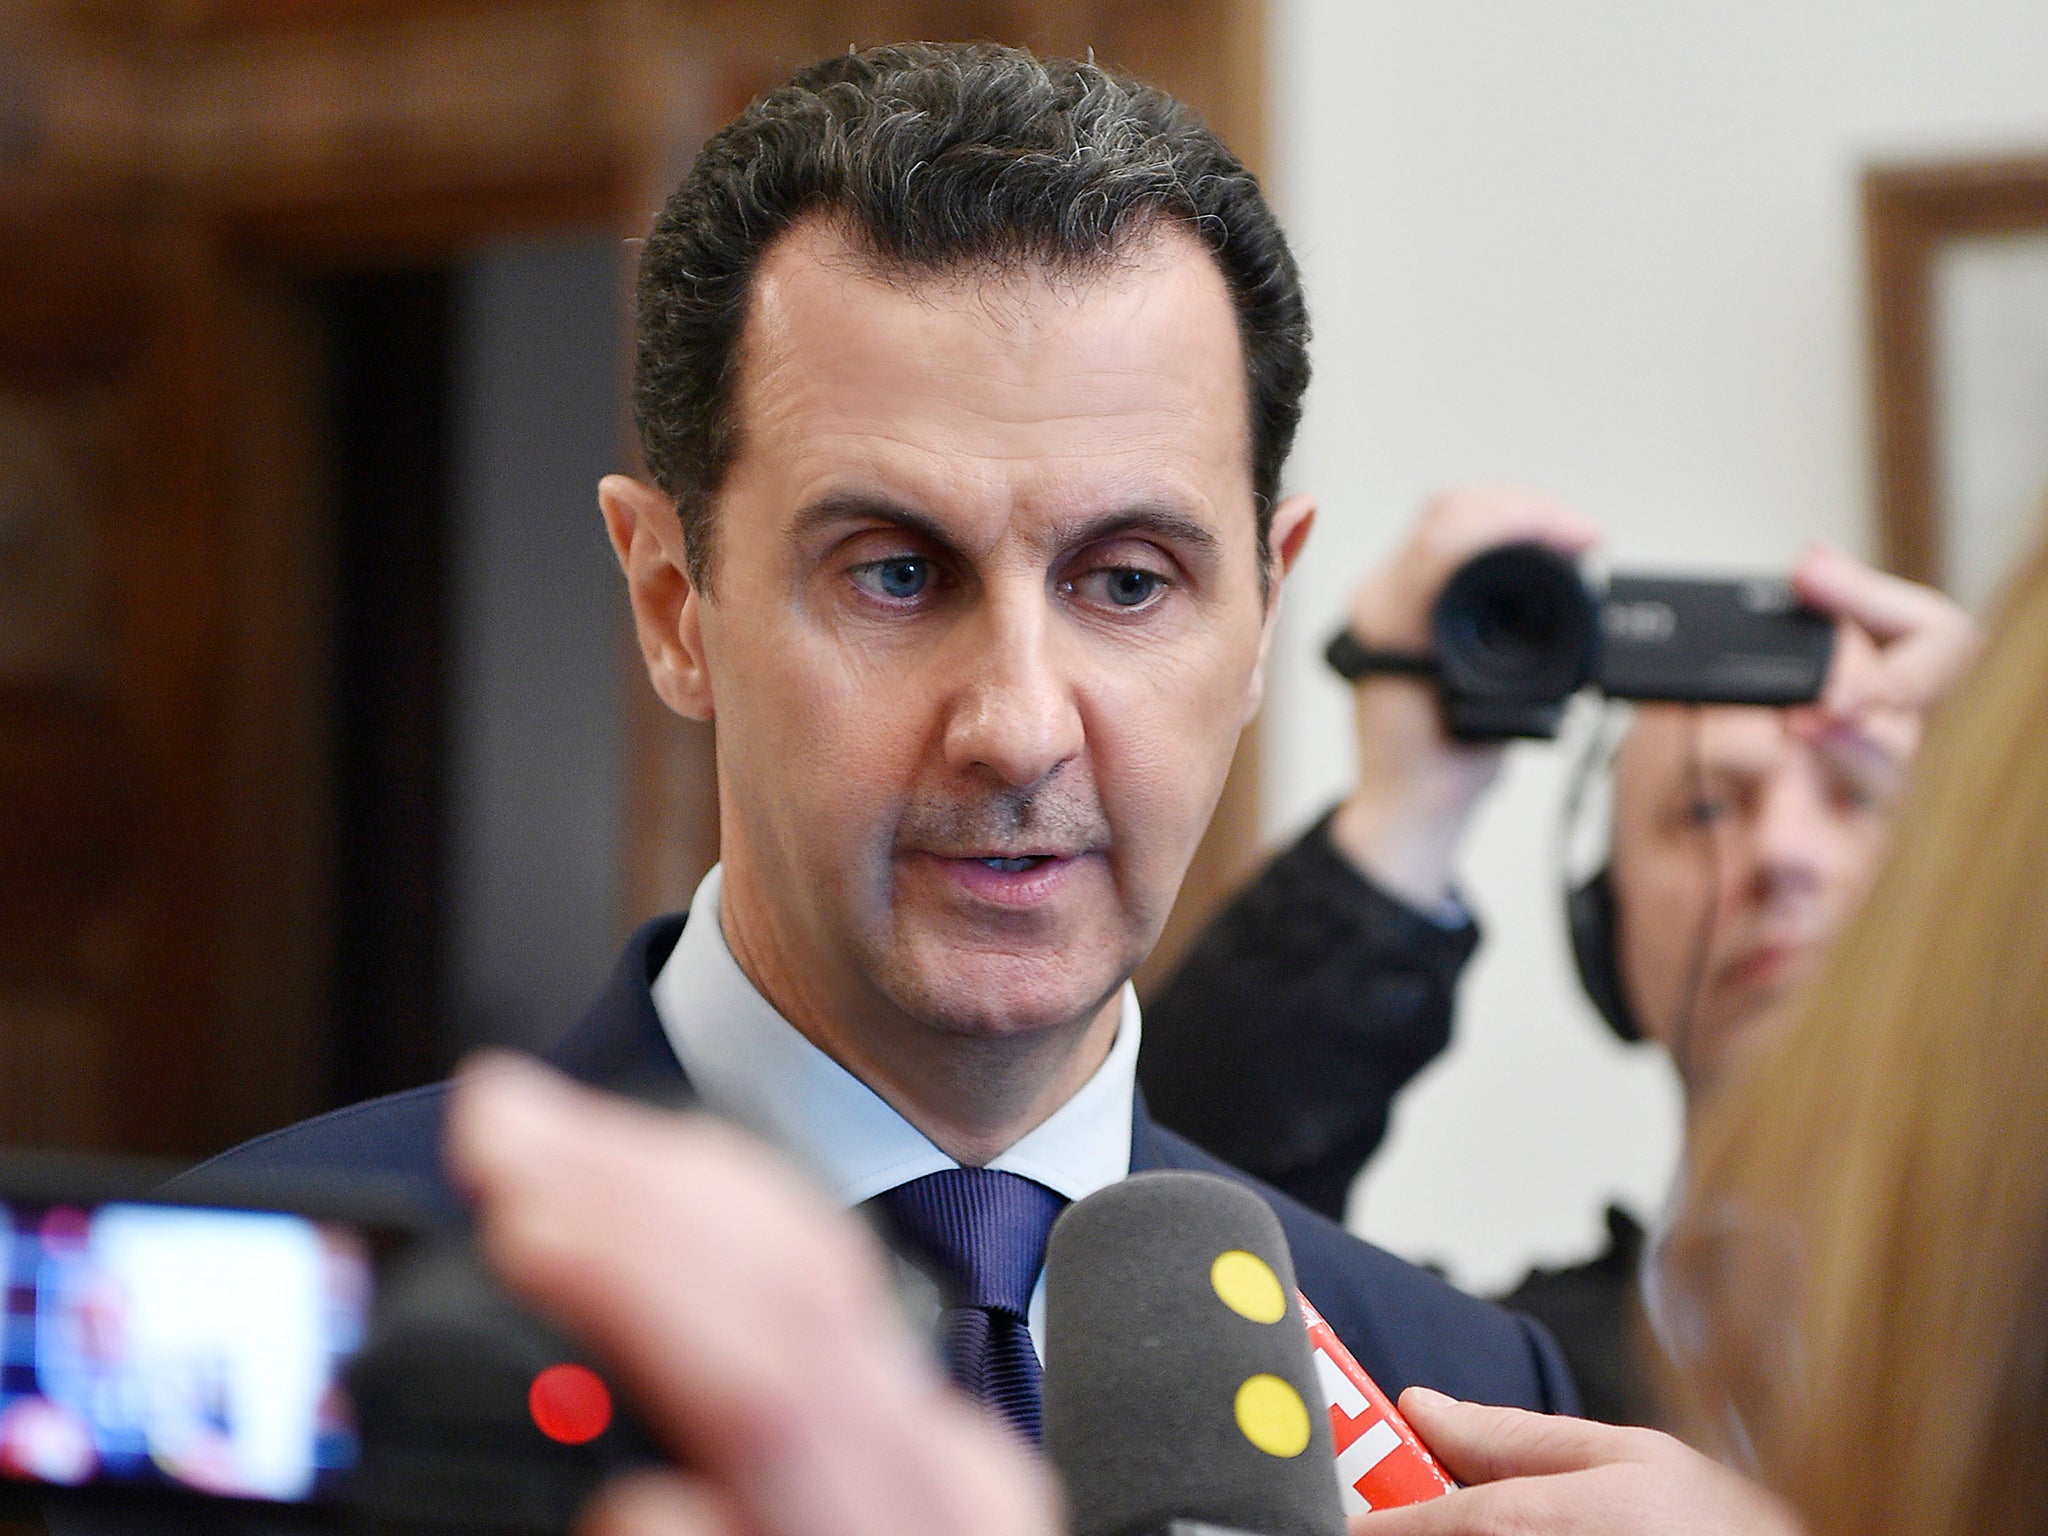 The Syrian people will elect their president as per the country's constitution, President Bashar al-Assad has said